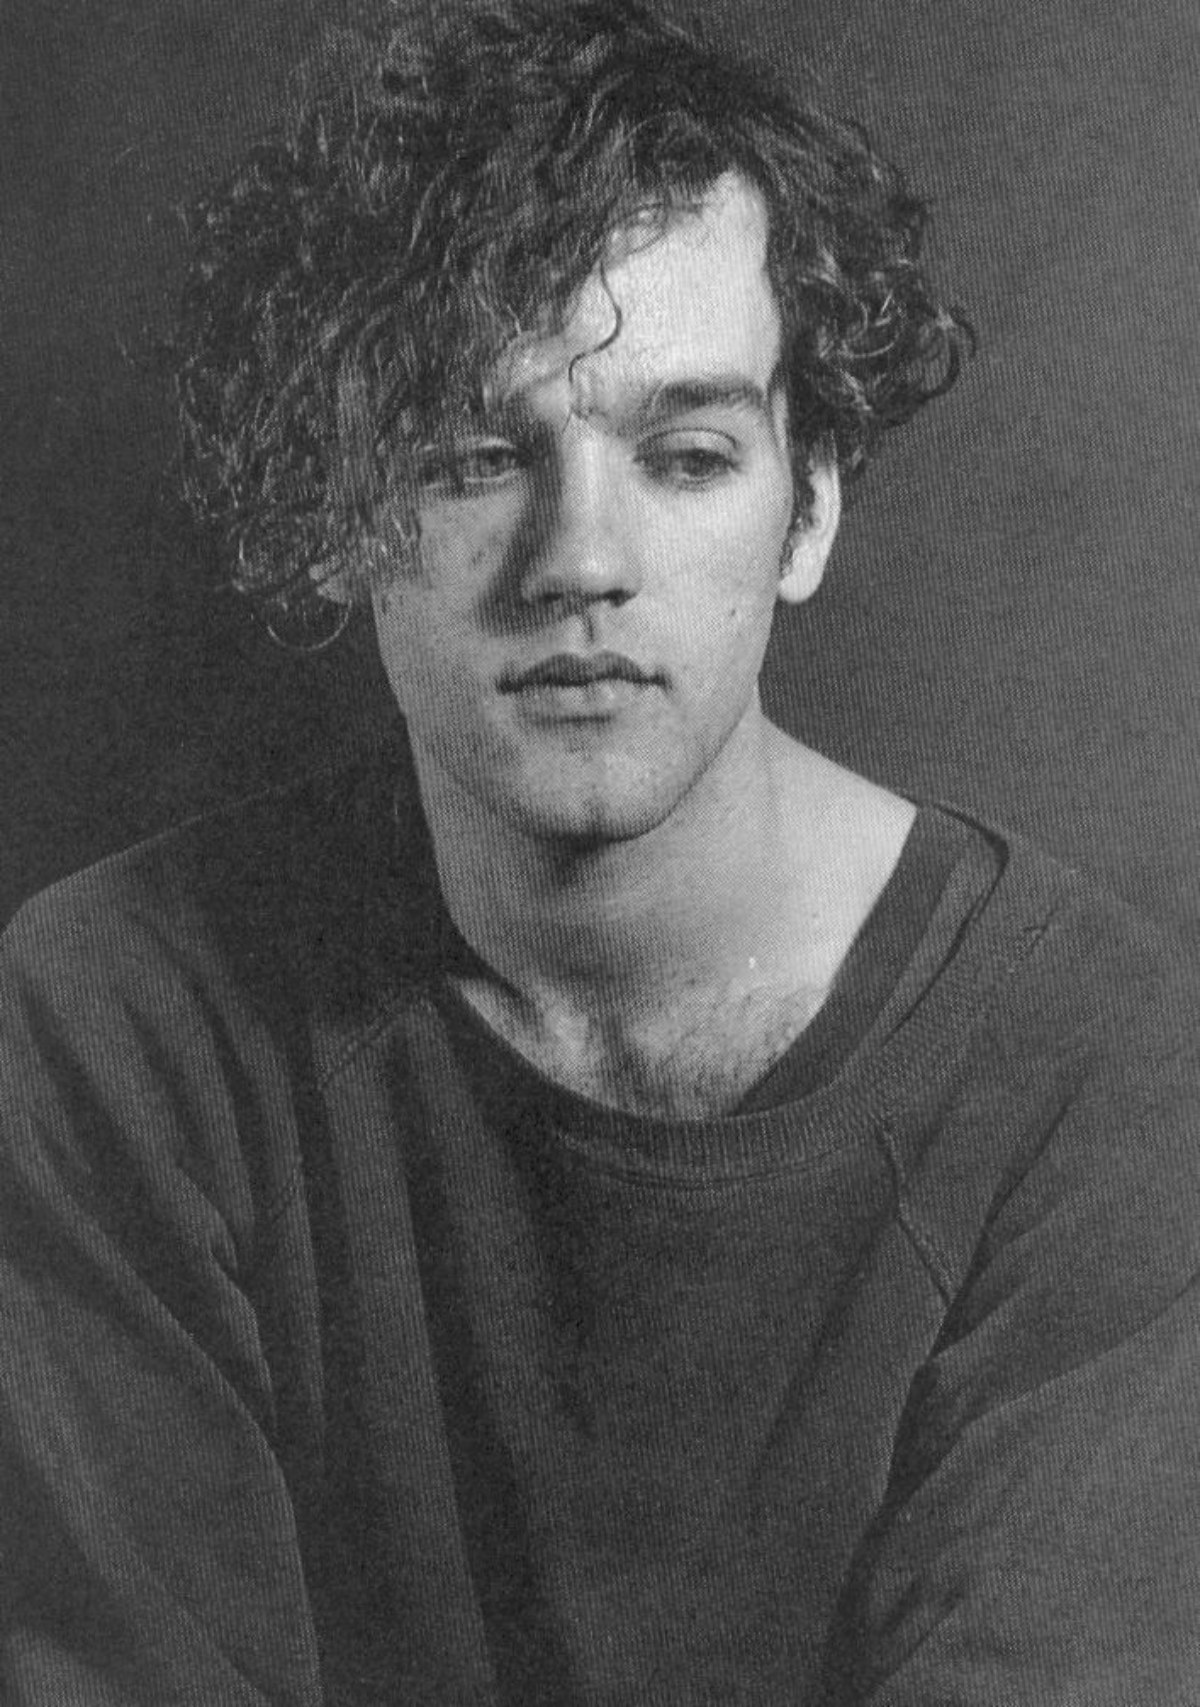 Michael Stipe as a young man